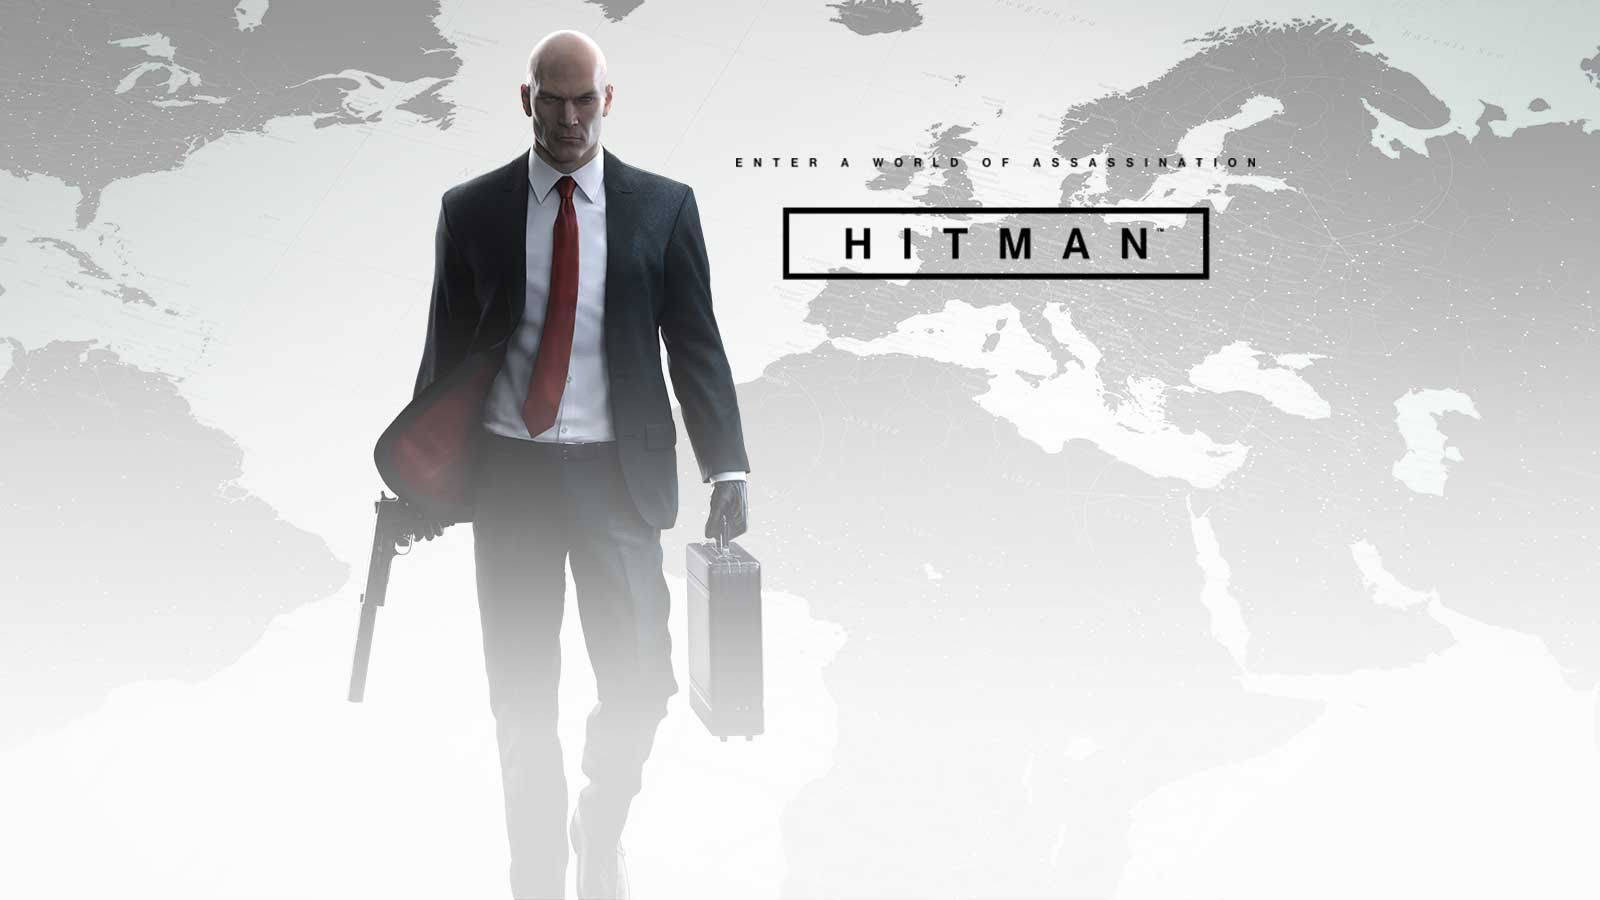 Hitman With World Map Background Wallpaper